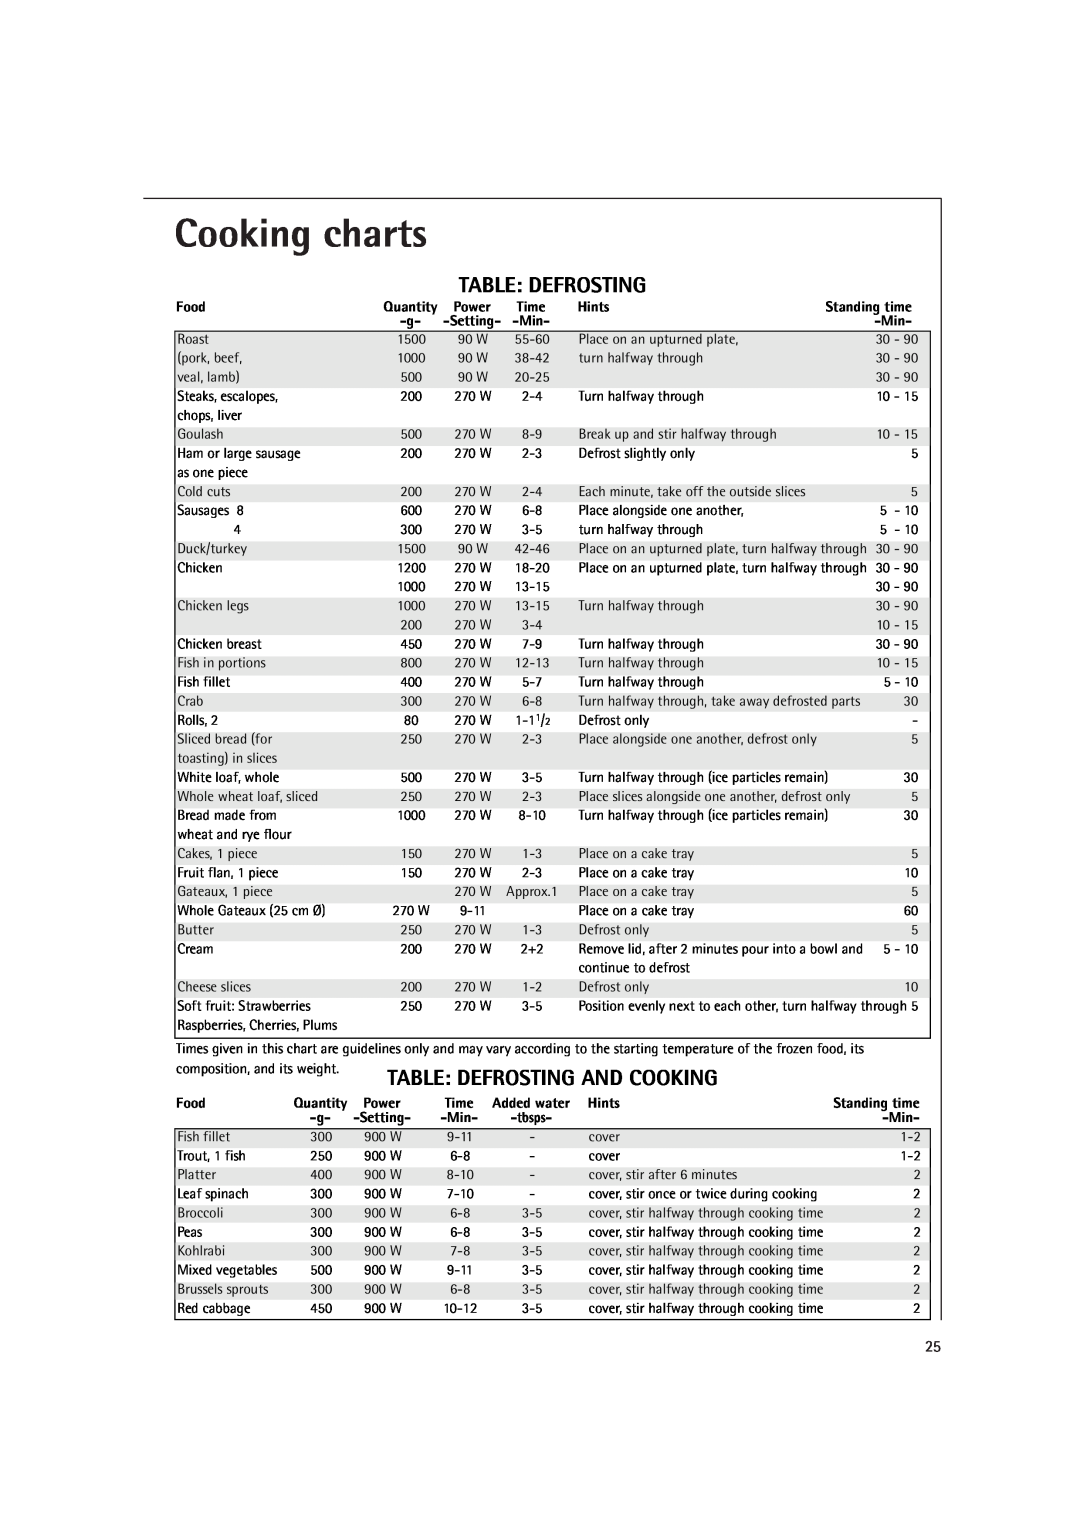 AEG MC2660E operating instructions Table Defrosting, Cooking charts, Food, Time, Hints, Setting- -Min 